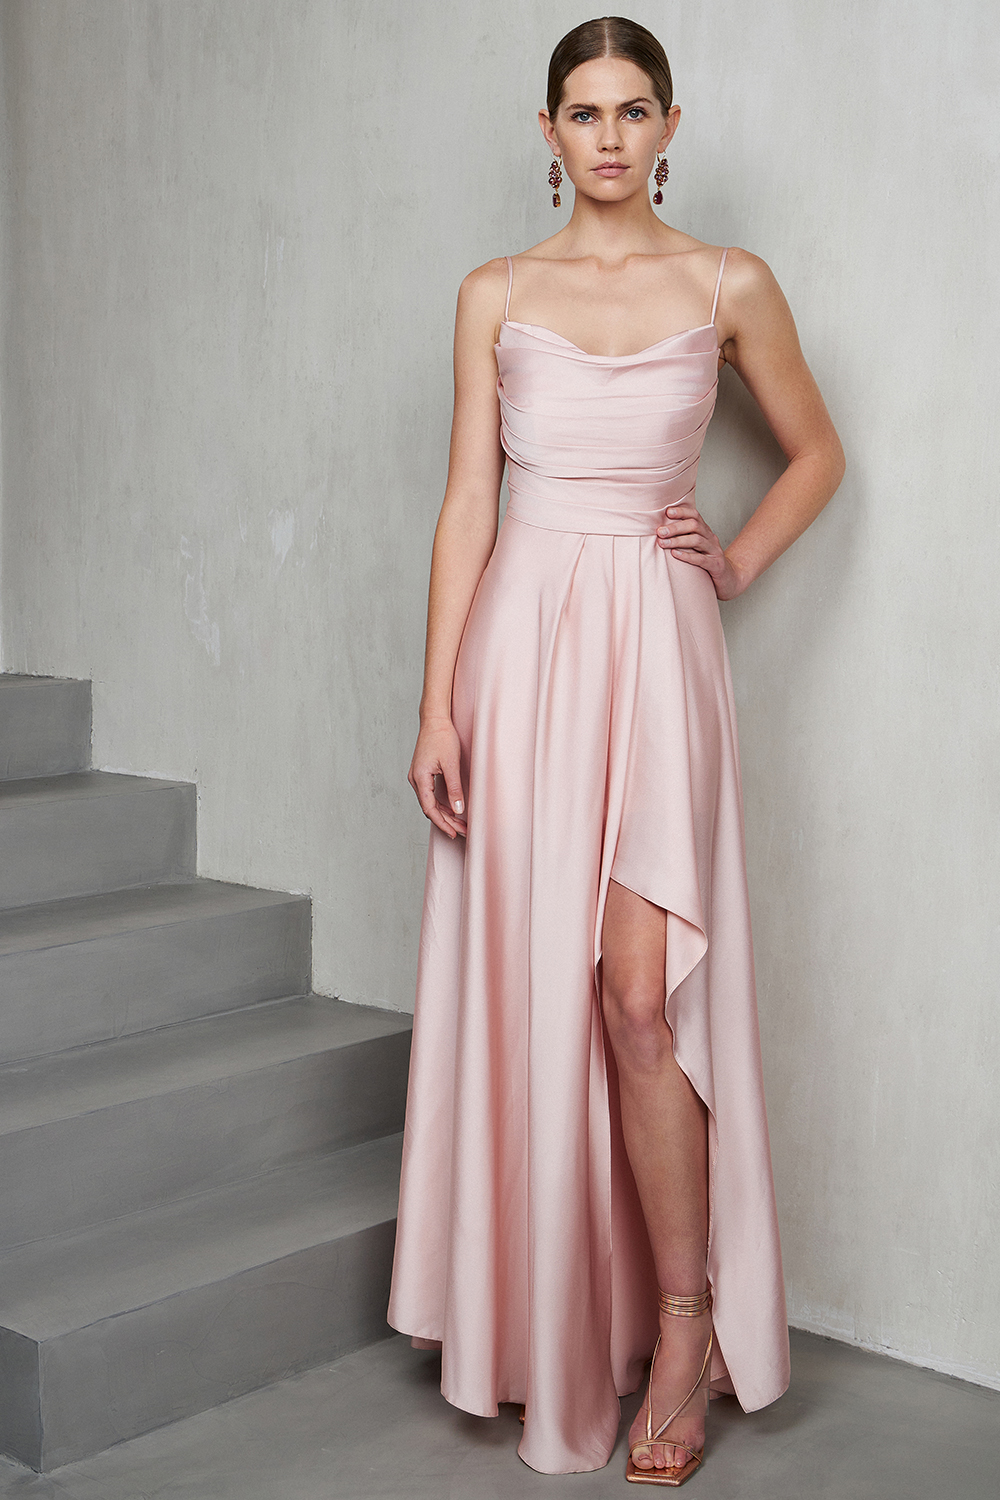 Cocktail Dresses / Long cocktail satin dress with open back